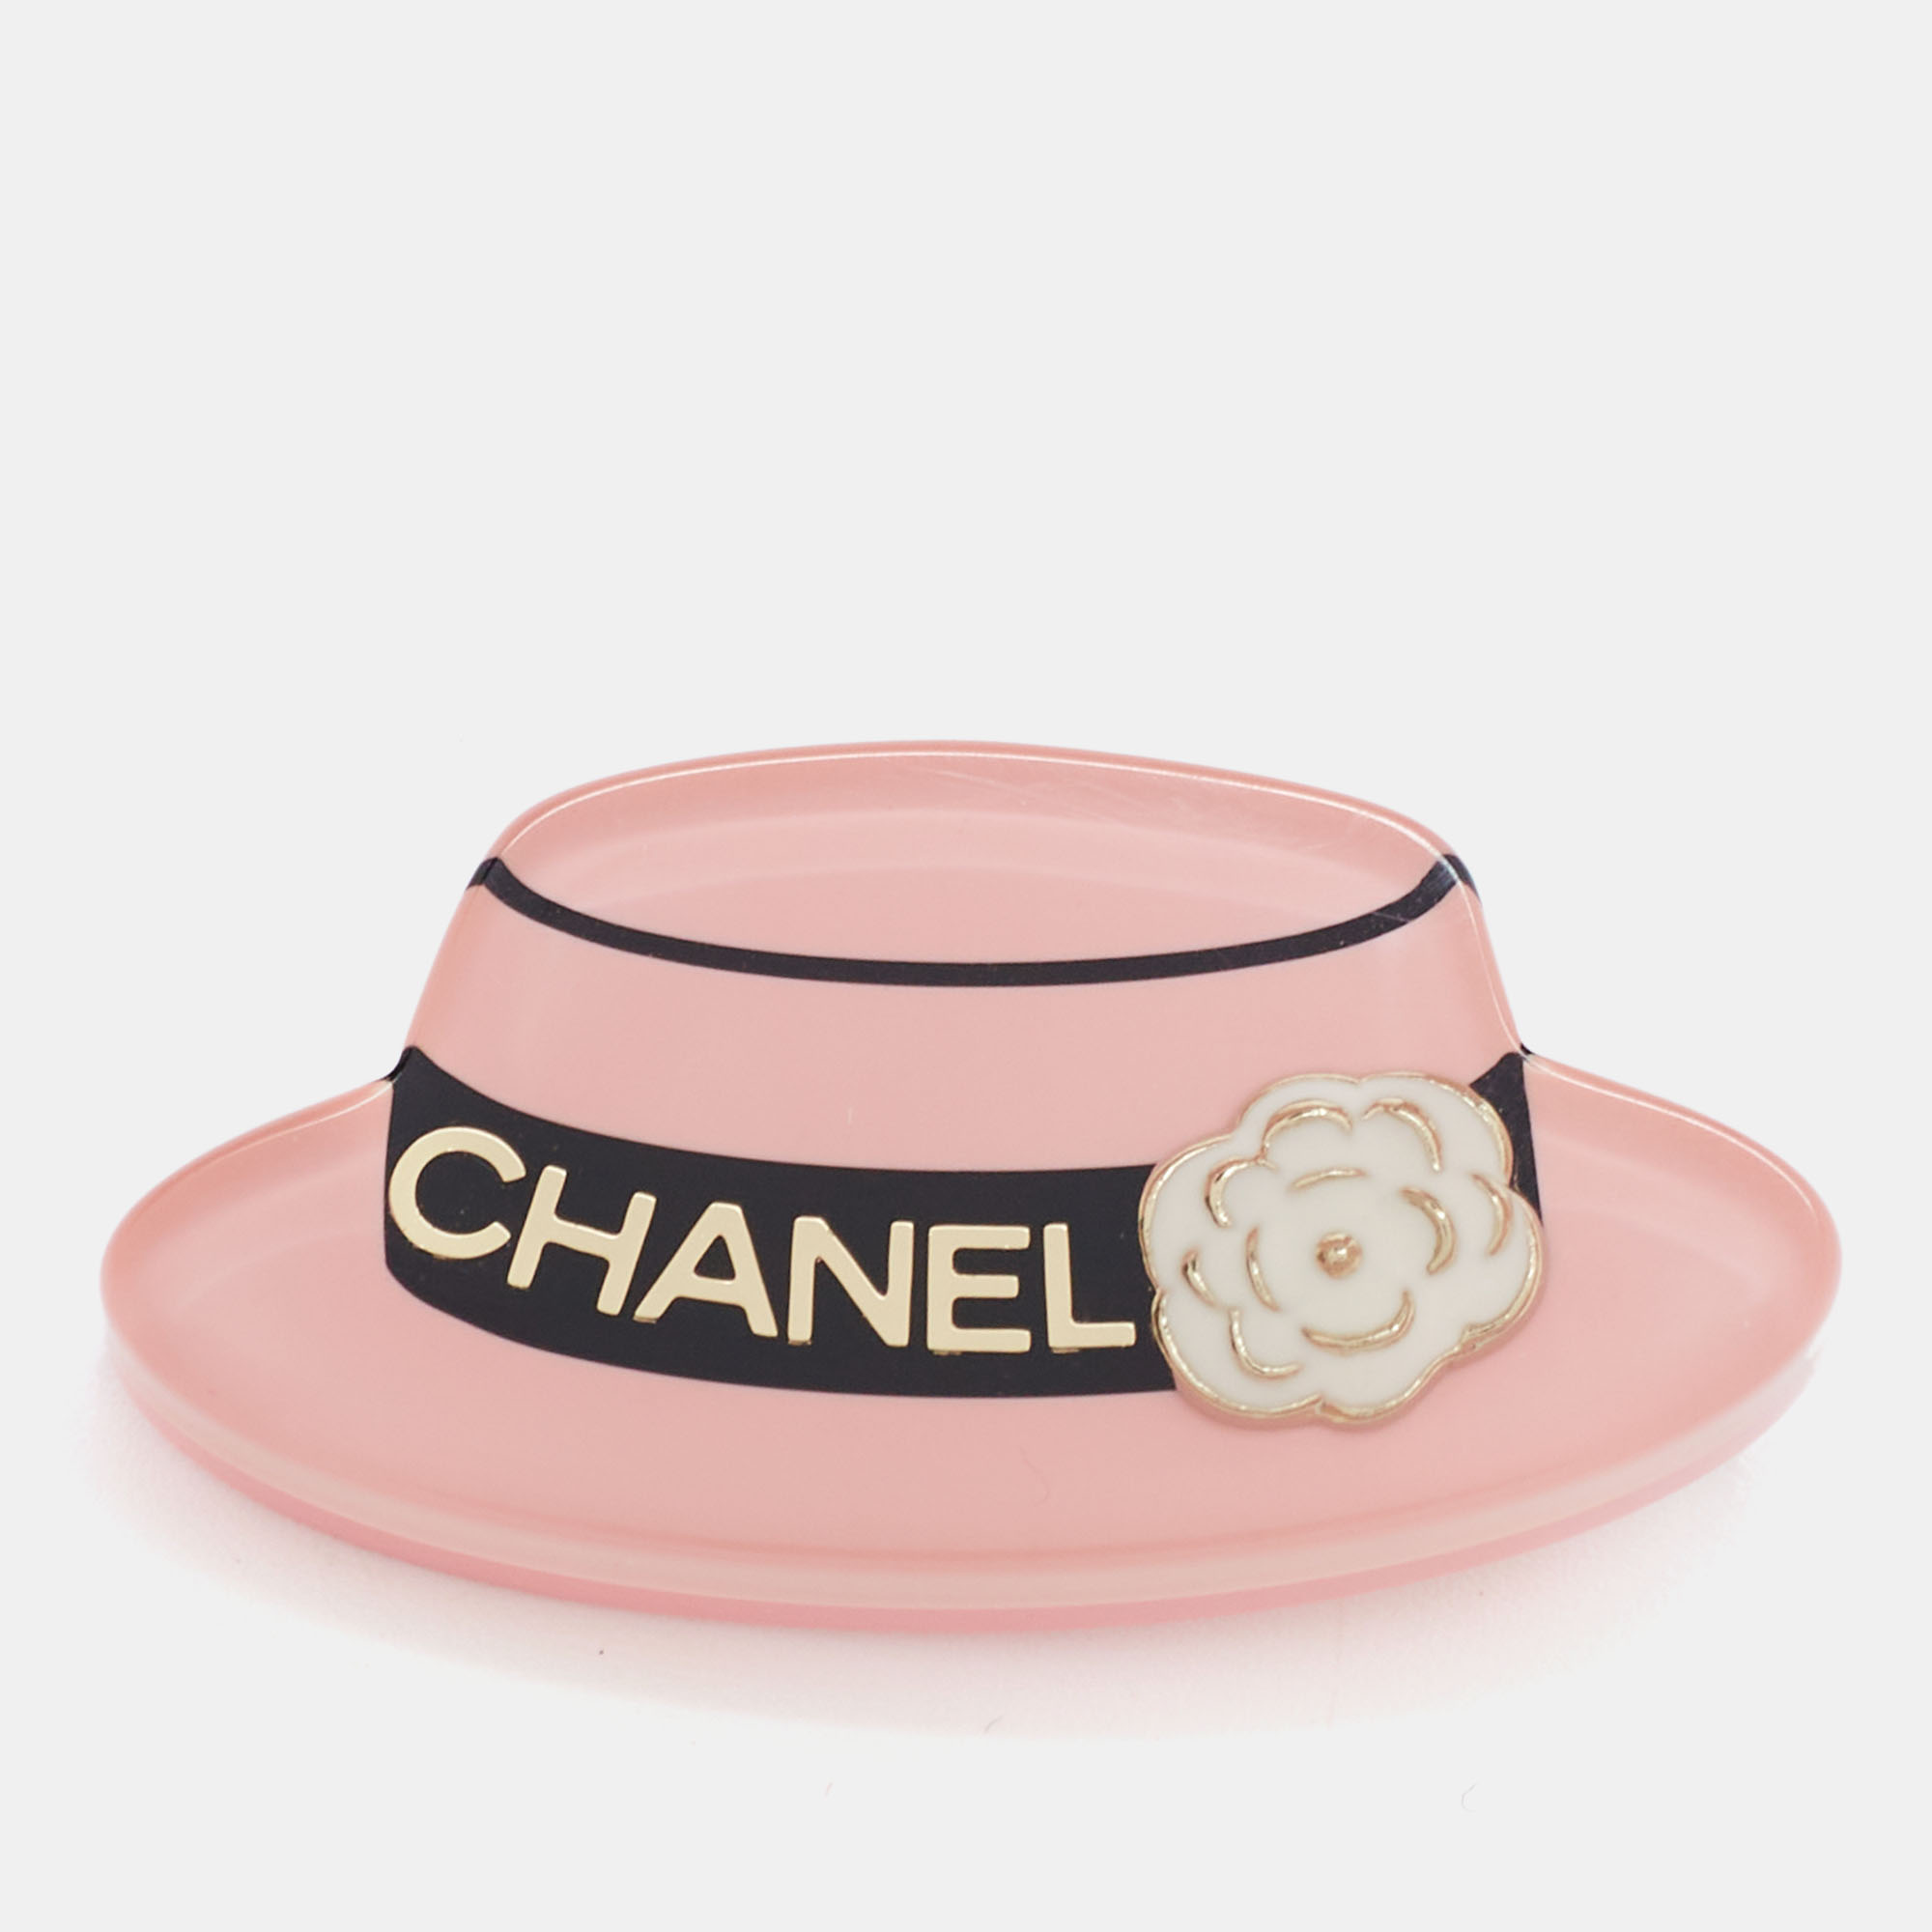 Chanel Hat Resin Gold Tone Brooch